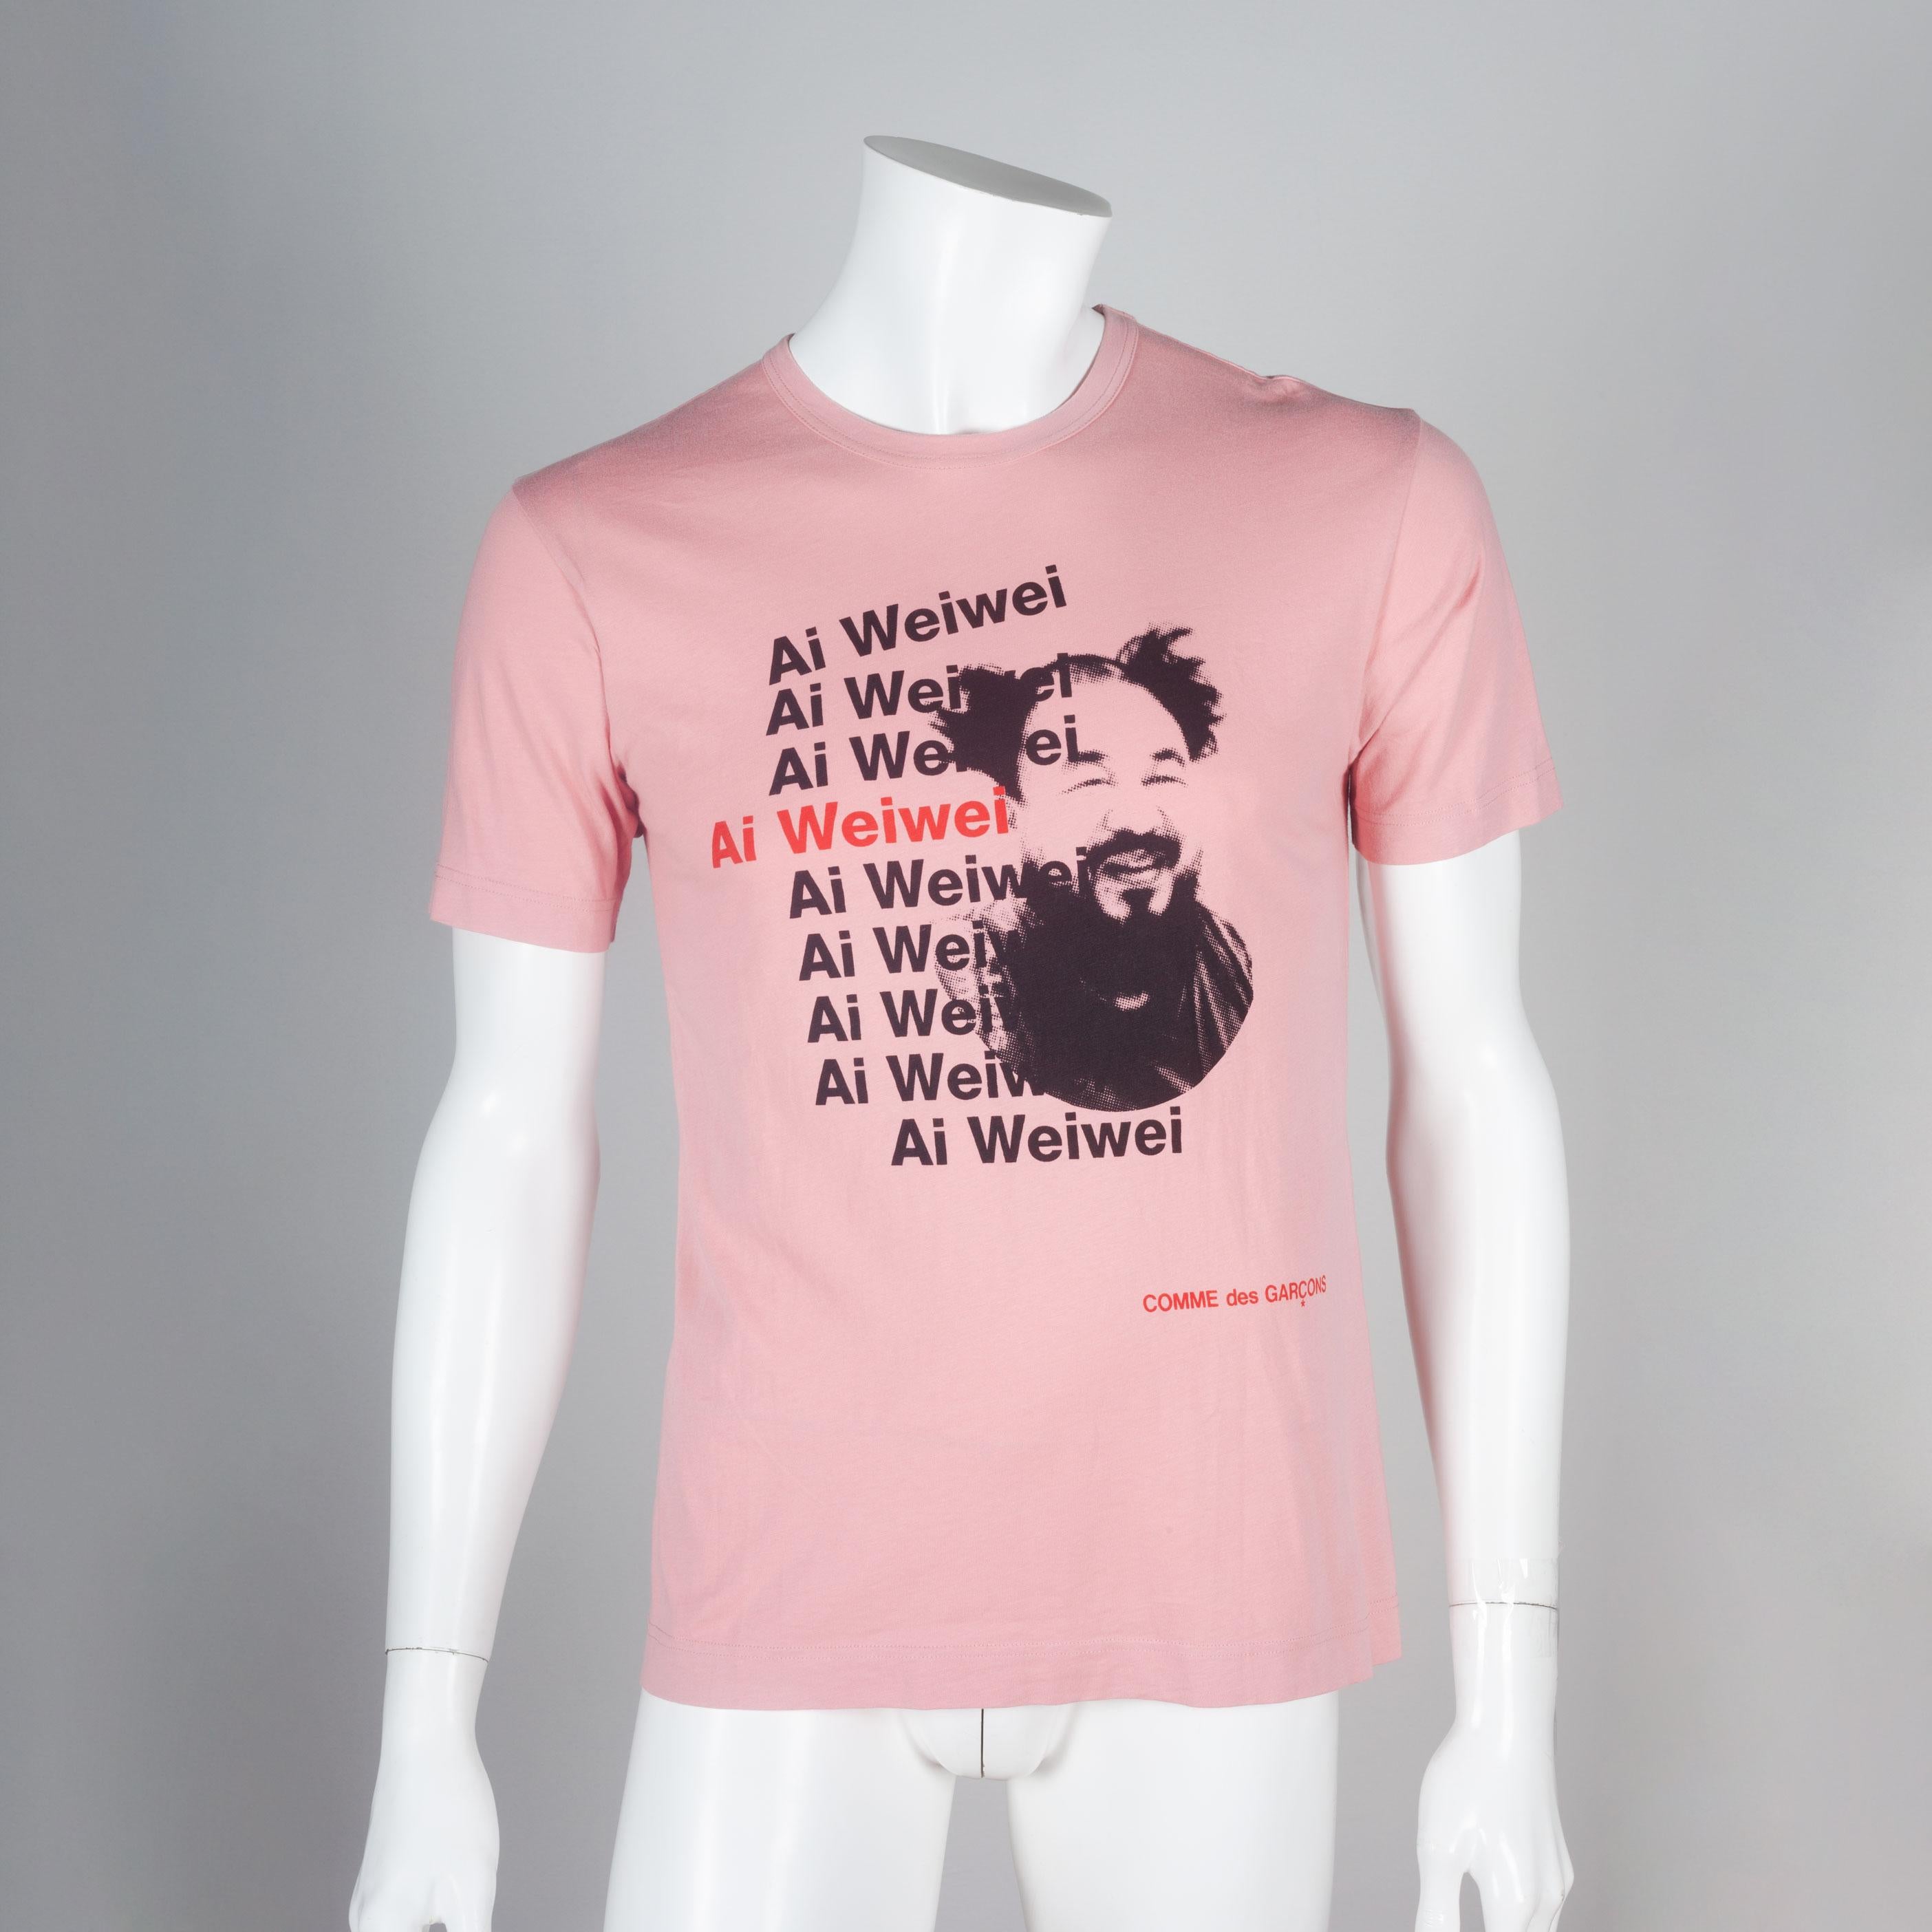 Comme des Garçons pink Ai Weiwei tee from 2010. The t-shirt features the Chinese contemporary artist and activist's portrait with his name repeating down the center front. 

YEAR: 2010
MARKED SIZE: M
US WOMEN'S: L
US MEN'S: M
FIT: Regular
CHEST: